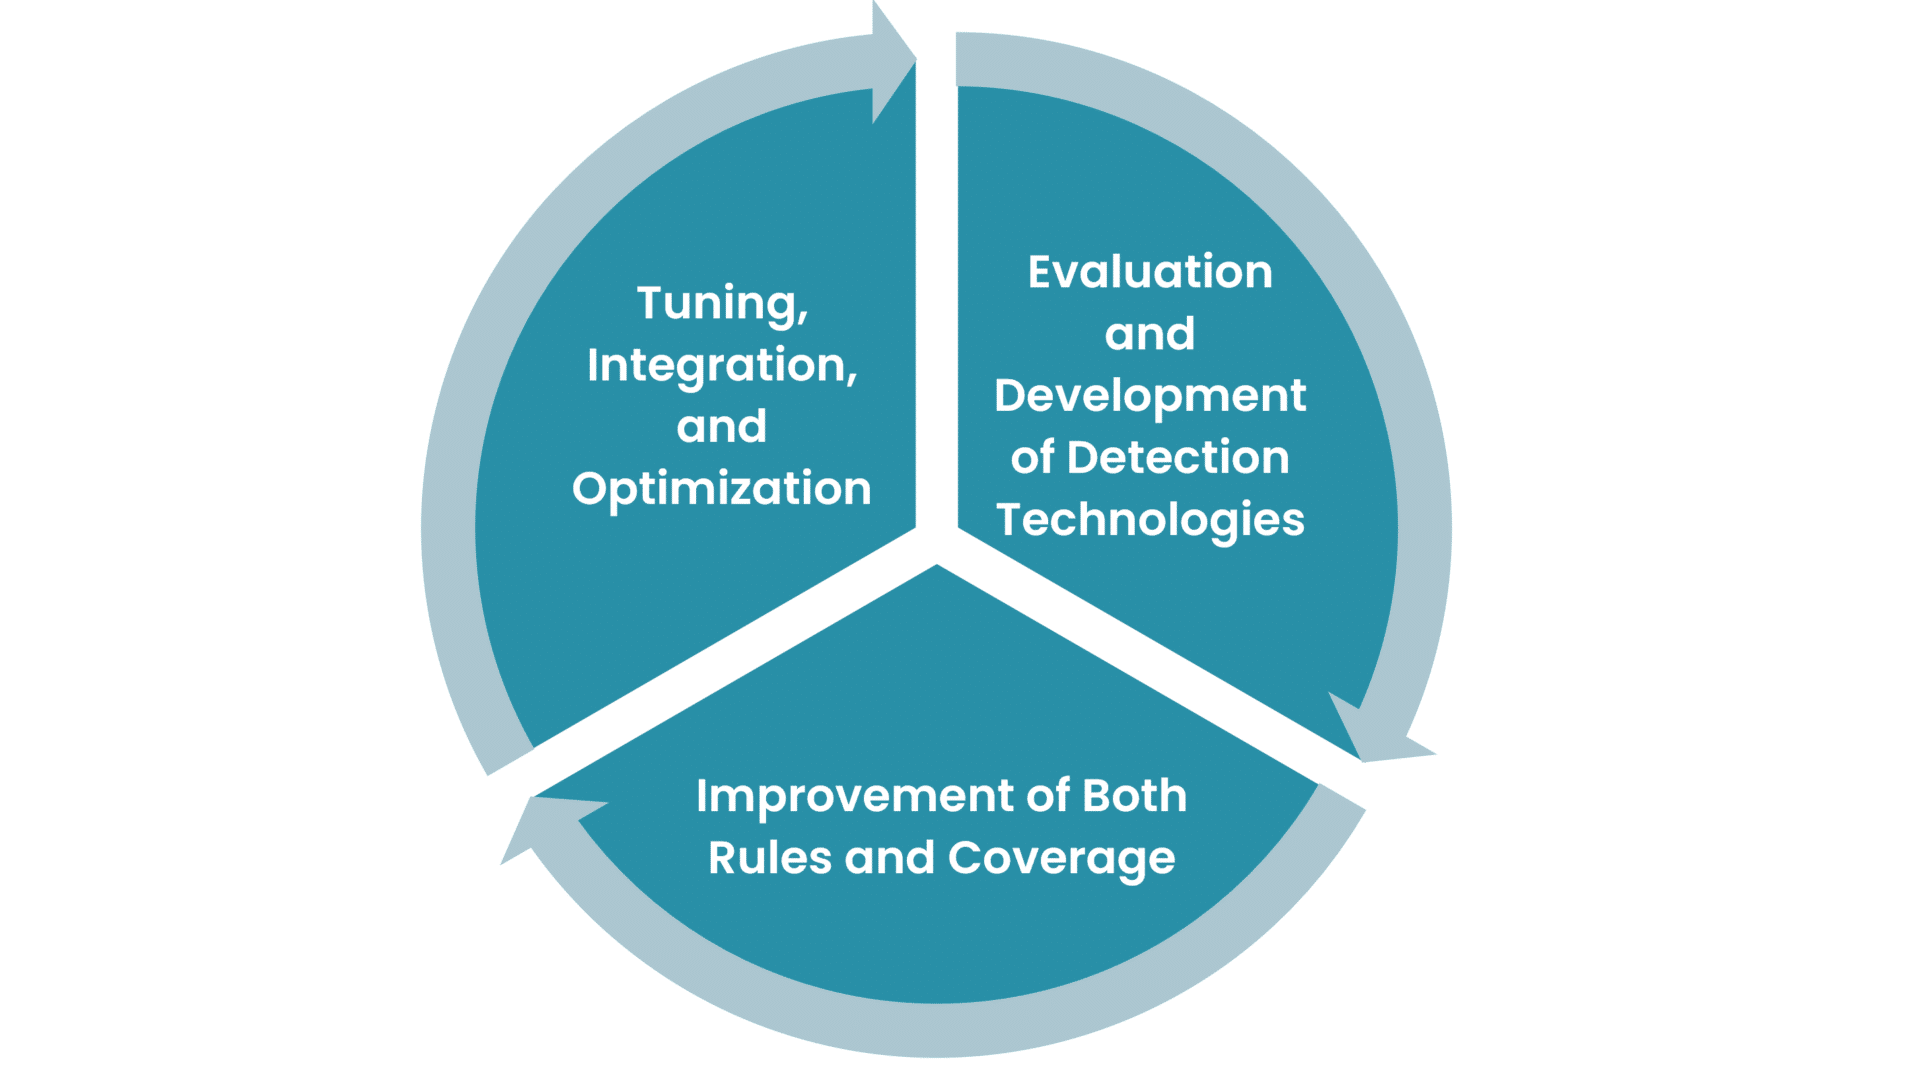 Image showing a pie chart with the  workflow in Detection Engineering. First pie: "Evaluation and Development of Detection Technologies". Second pie: "improvement of Both Rules and Coverage", Last Pie: "Tuning, Integration, and Optimization"